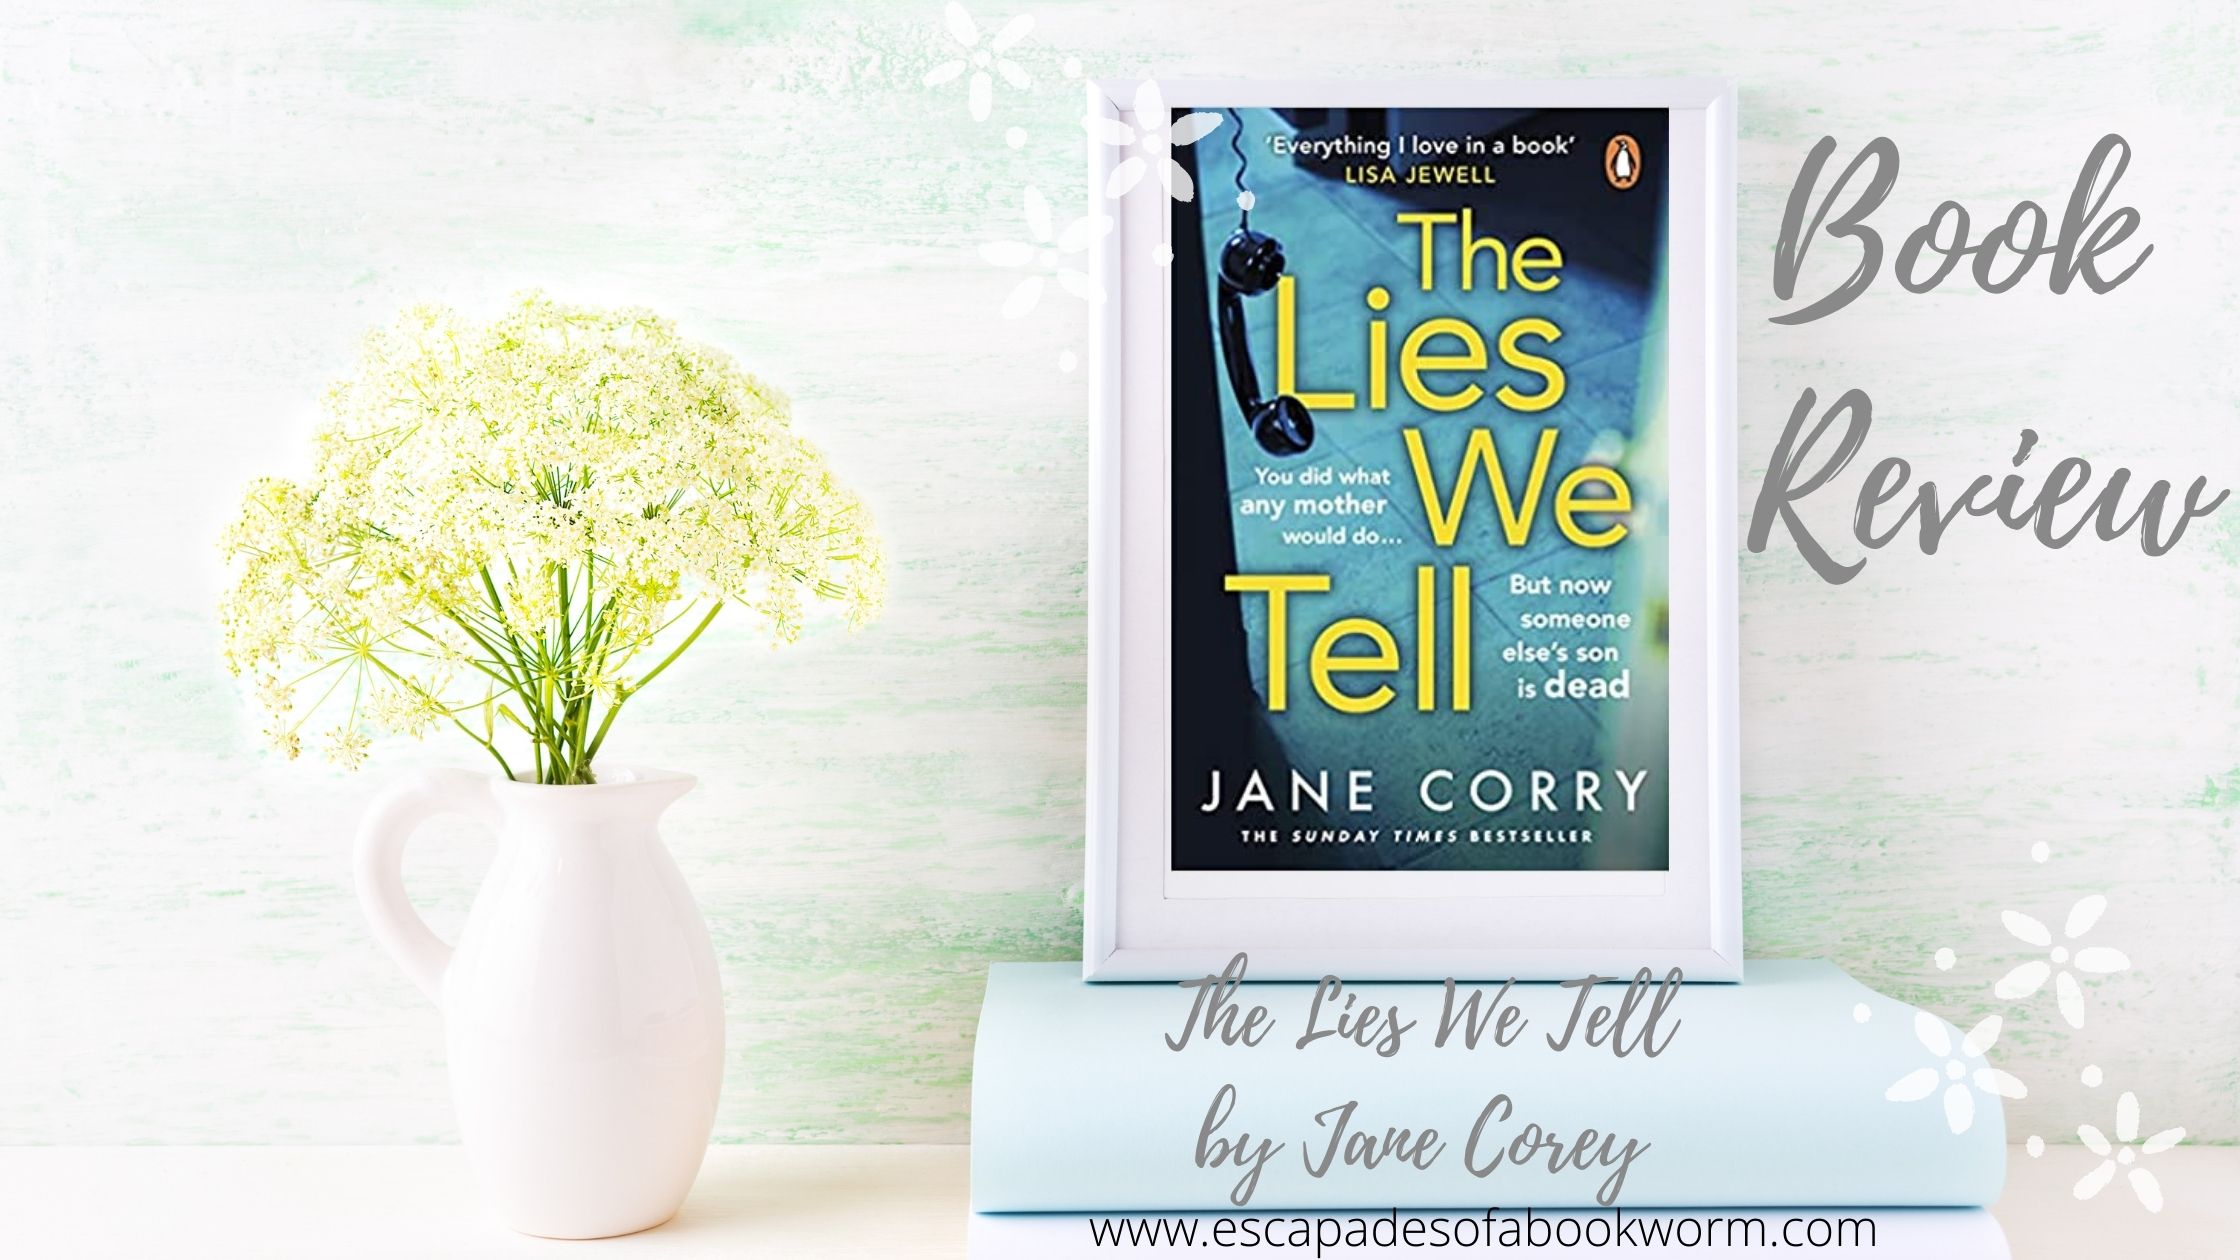 The Lies We Tell by Jane Corey